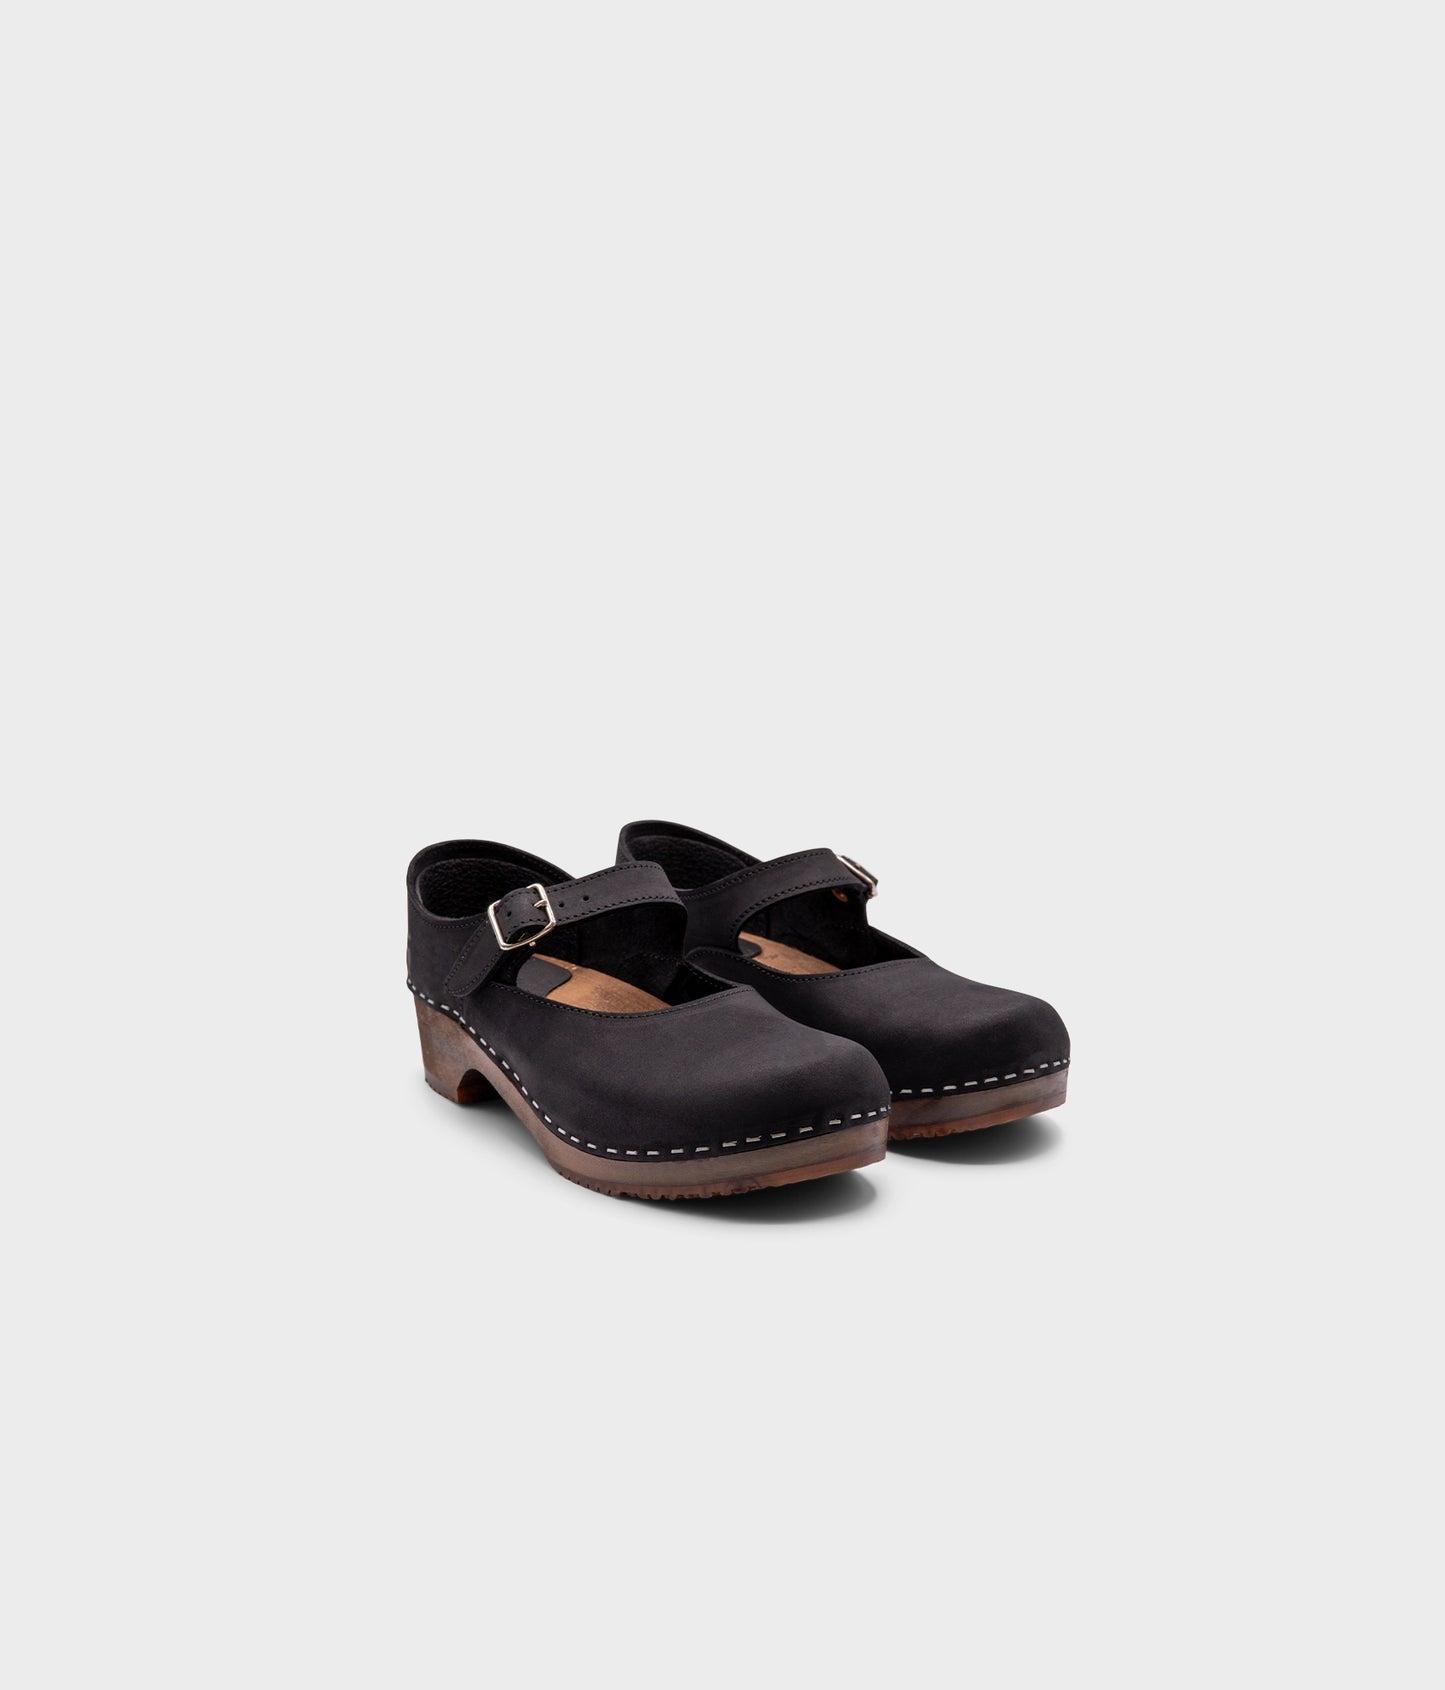 Mary Jane wooden clogs in black nubuck leather stapled on a dark wooden base